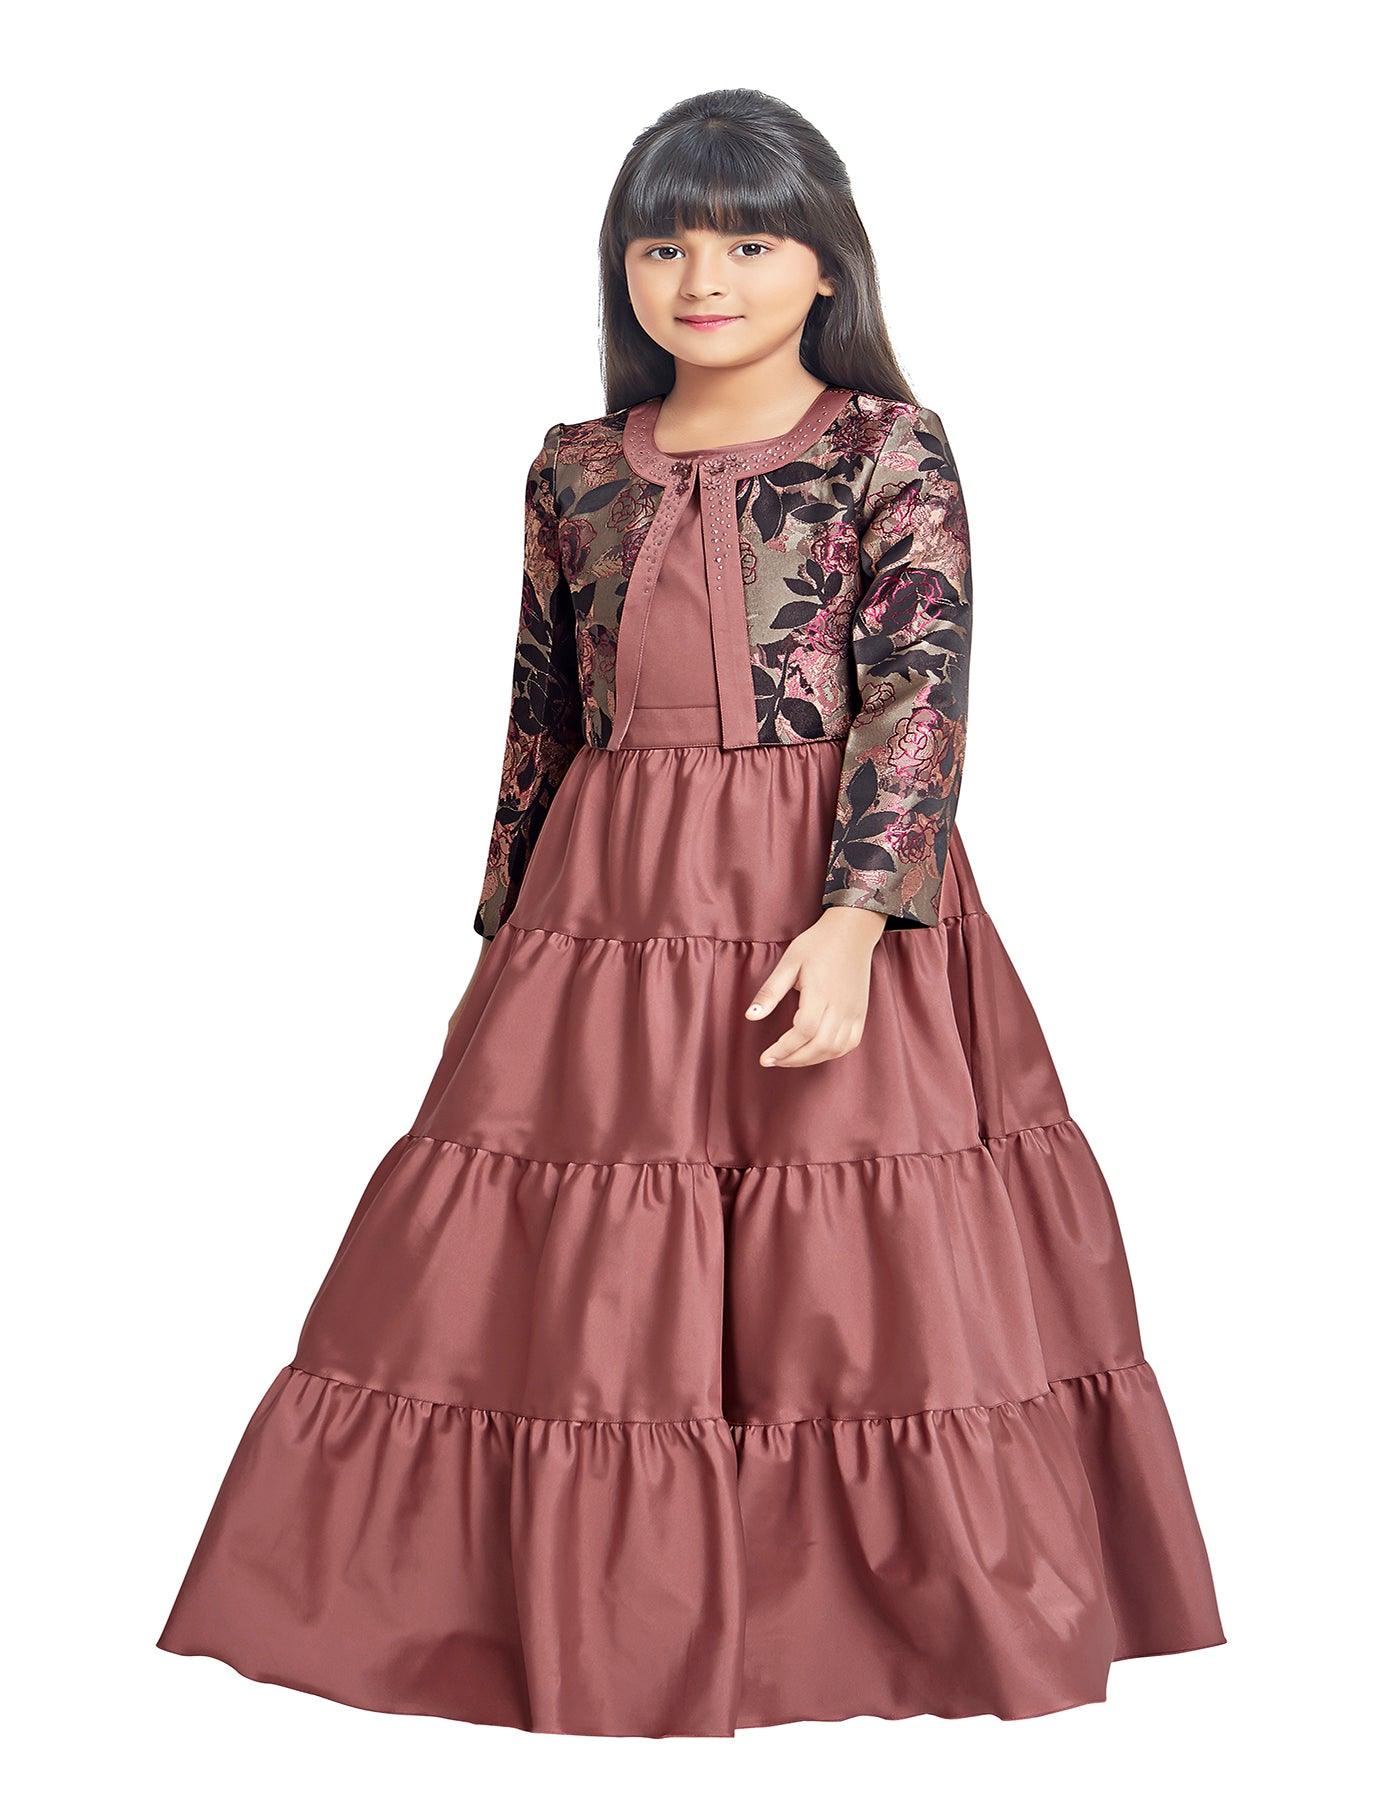 Solid Pattern Brick Colored Gown - 1823-Brick - TINY BABY INDIA shop.tinybaby.in